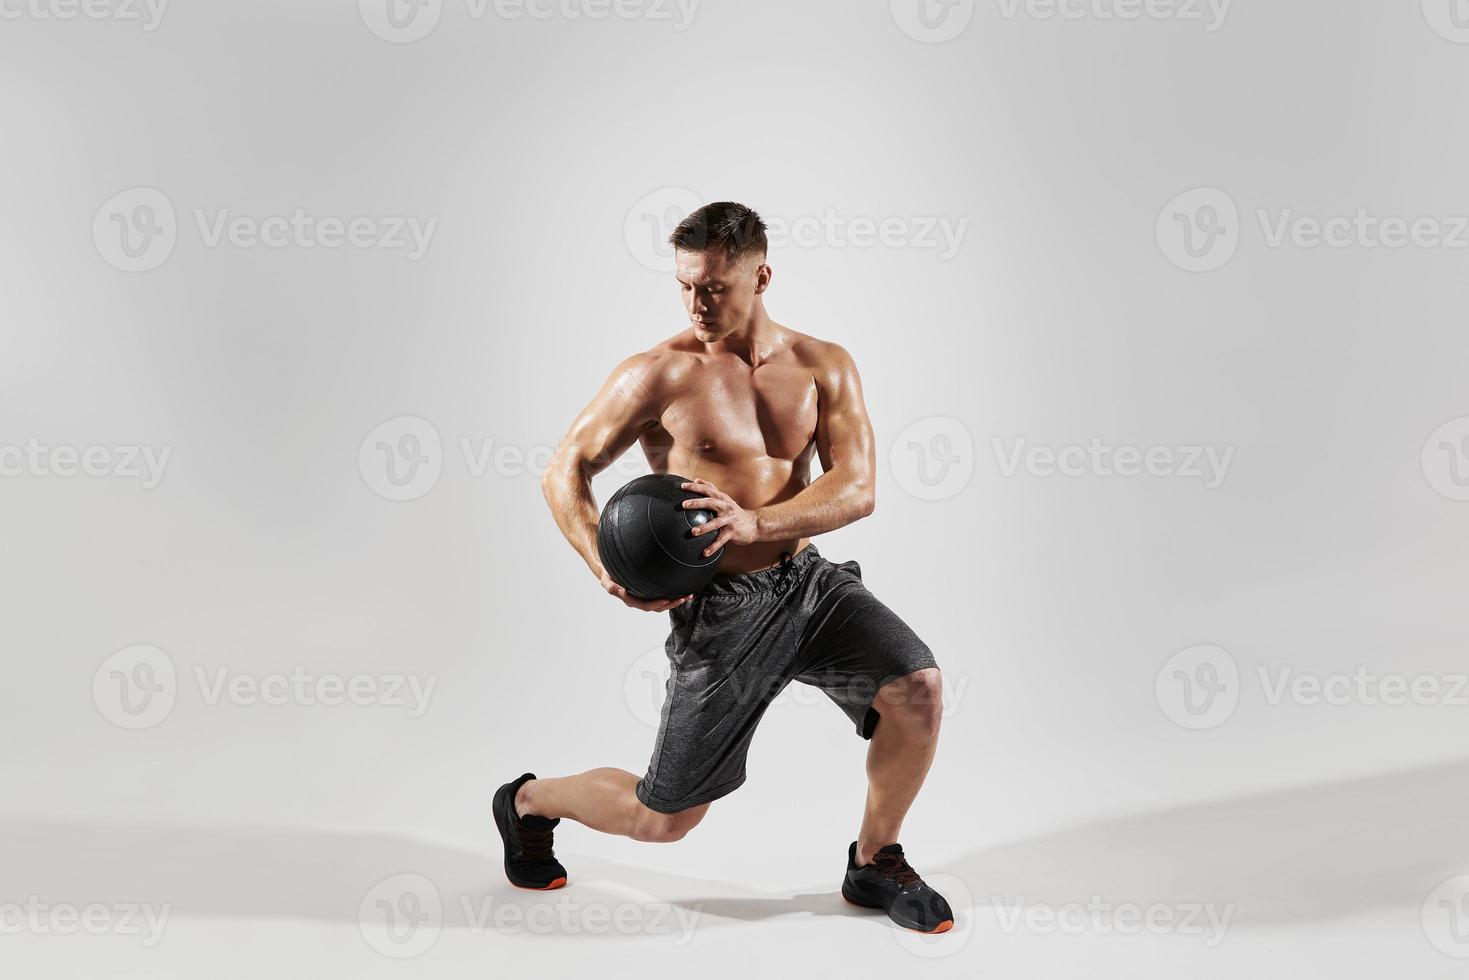 Concentrated young man with perfect body exercising with medicine ball against white background photo